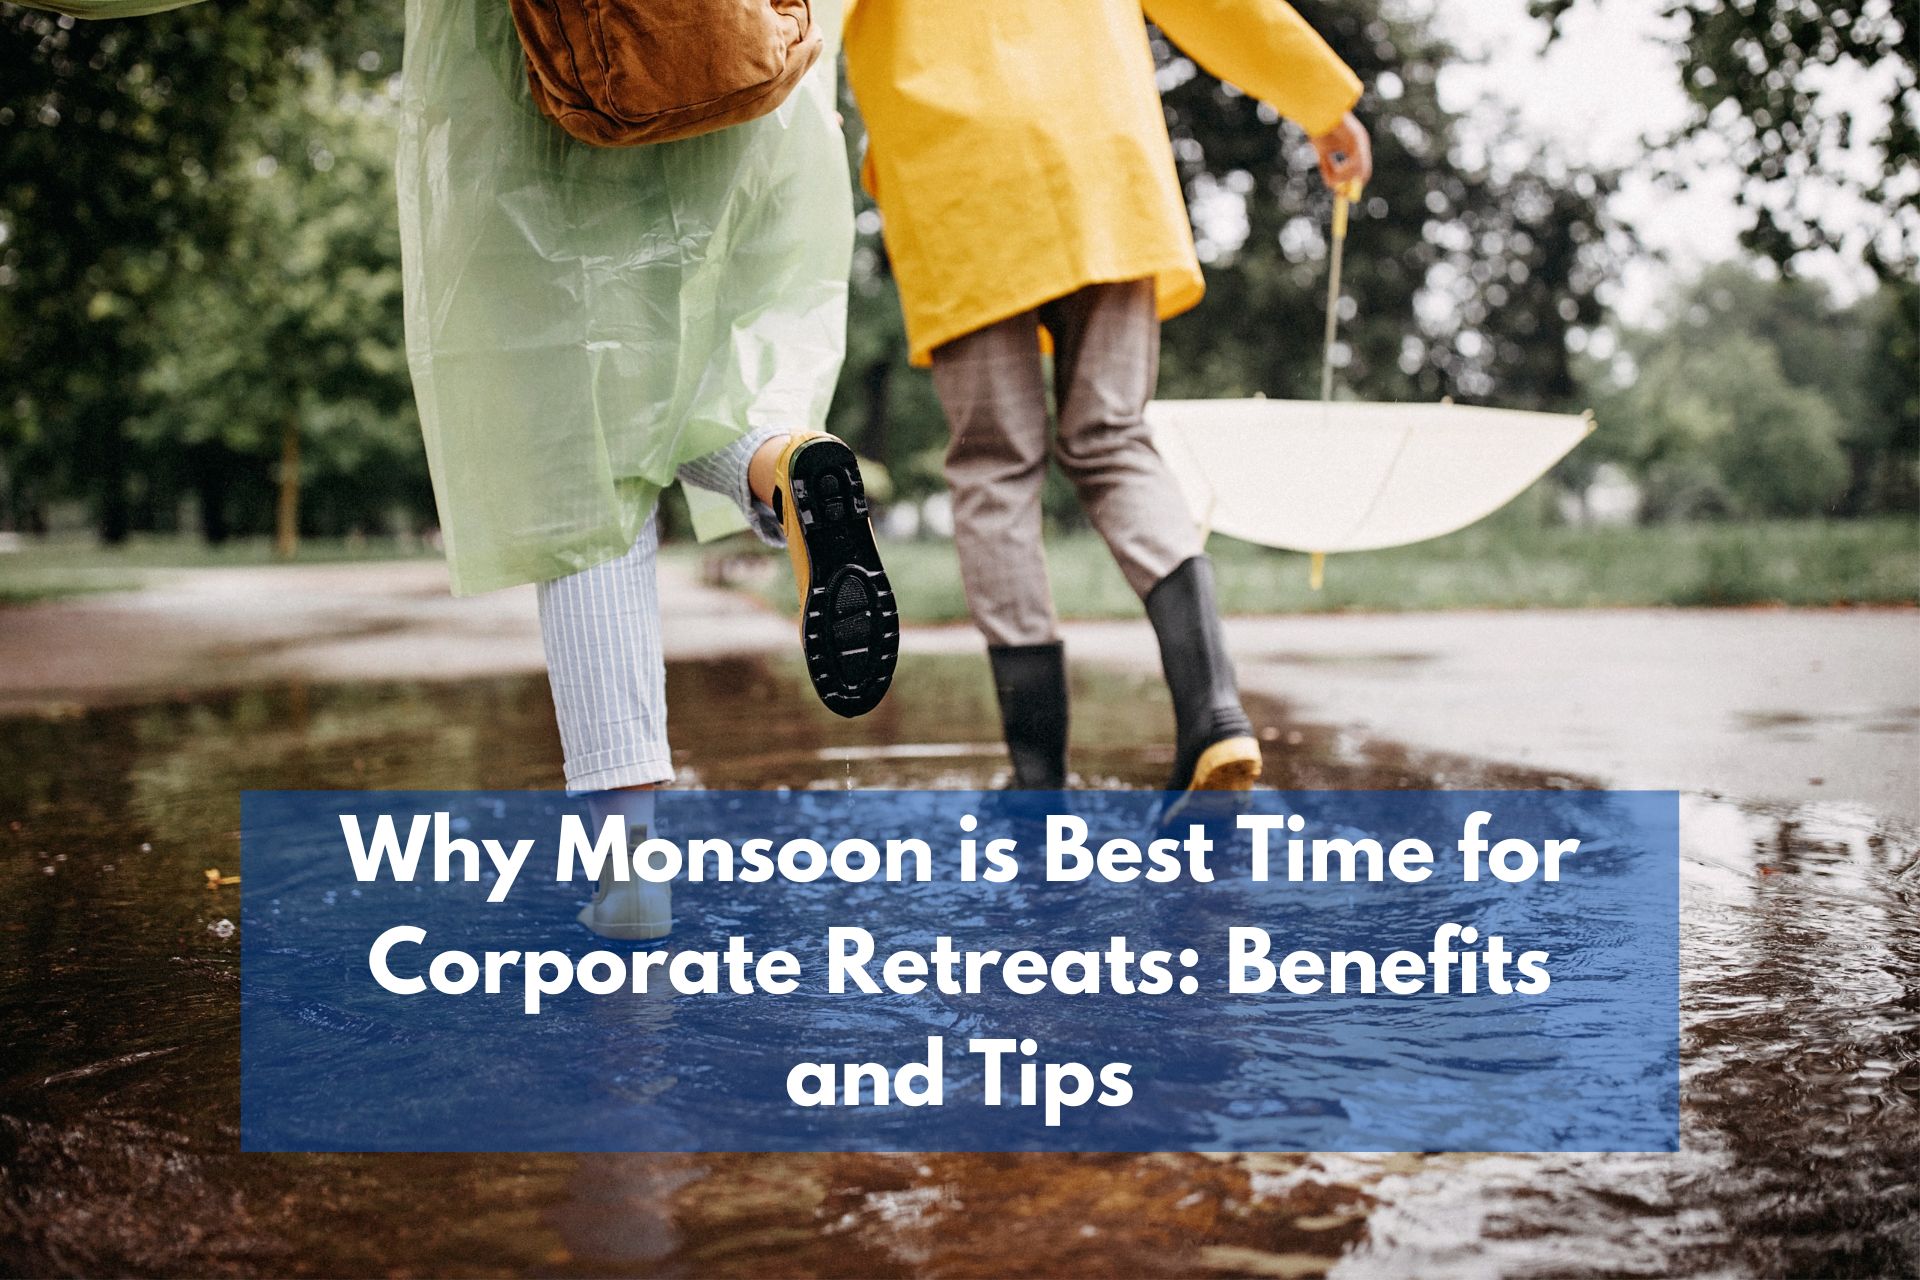 Why Monsoon is Best Time for Corporate Retreats Benefits and Tips